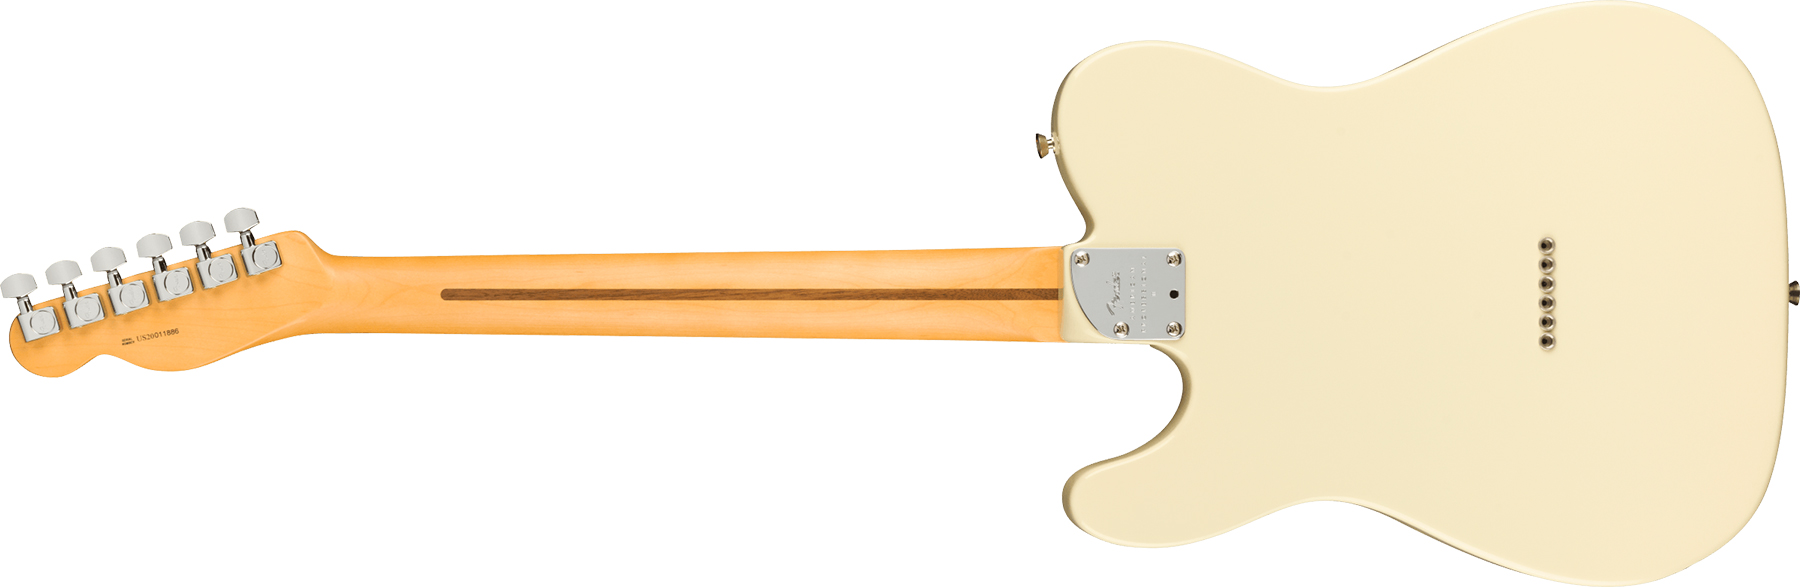 Fender Tele American Professional Ii Usa Rw - Olympic White - Guitare Électrique Forme Tel - Variation 1